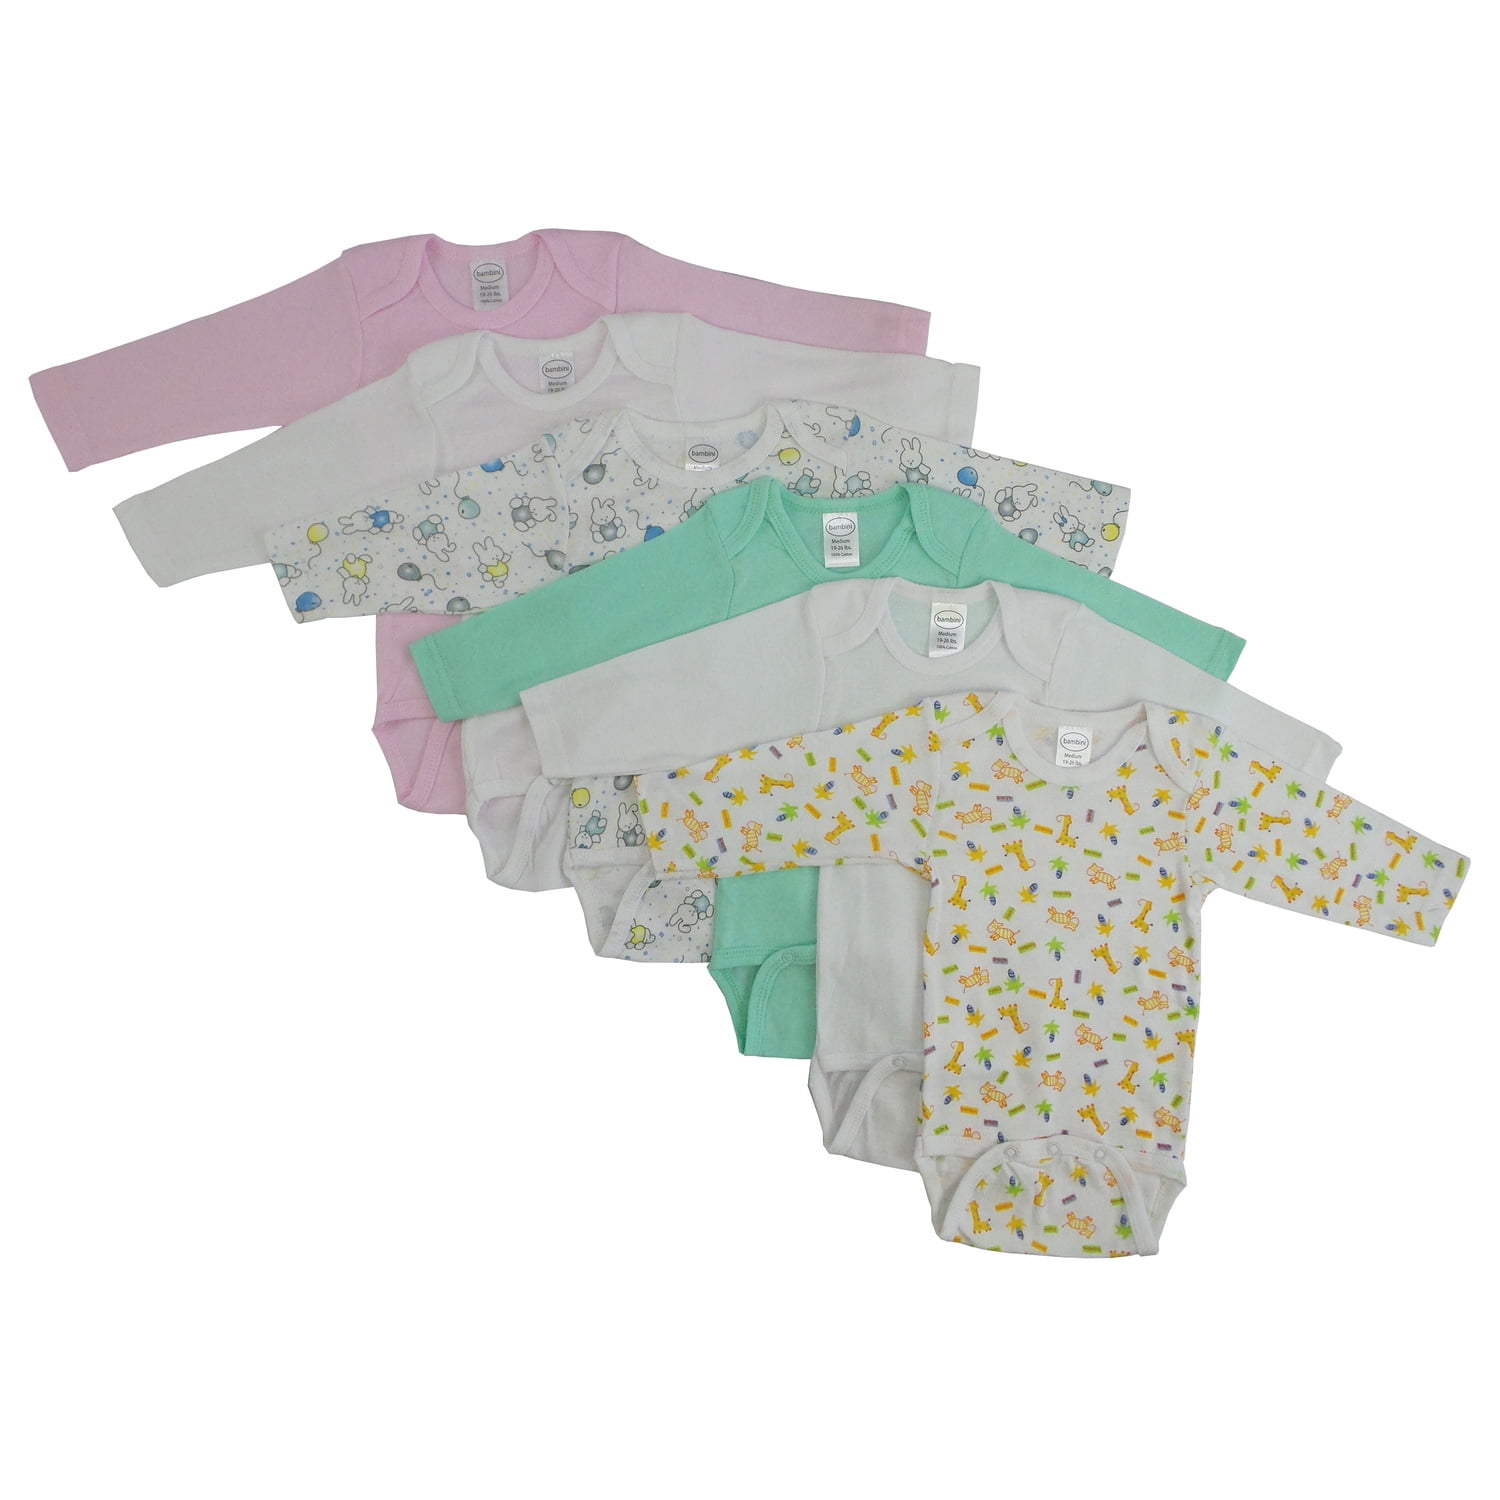 Cs-102s-103s Girls Long Sleeve Printed Variety, Assorted - Small